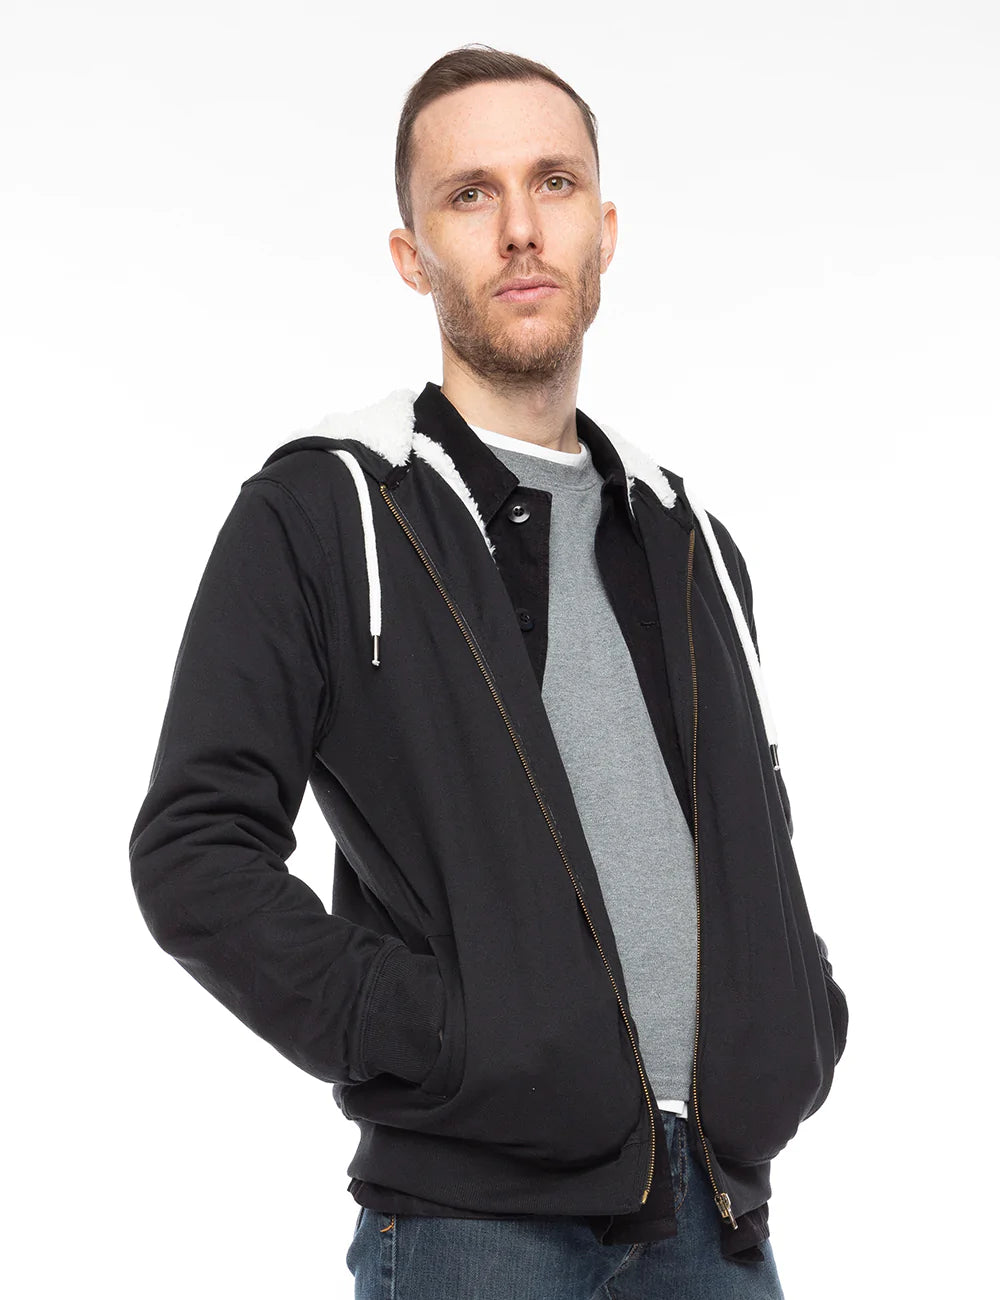 An easy-fitting hoodie&nbsp;bursting with sherpa inside - even the hood has fluff! 